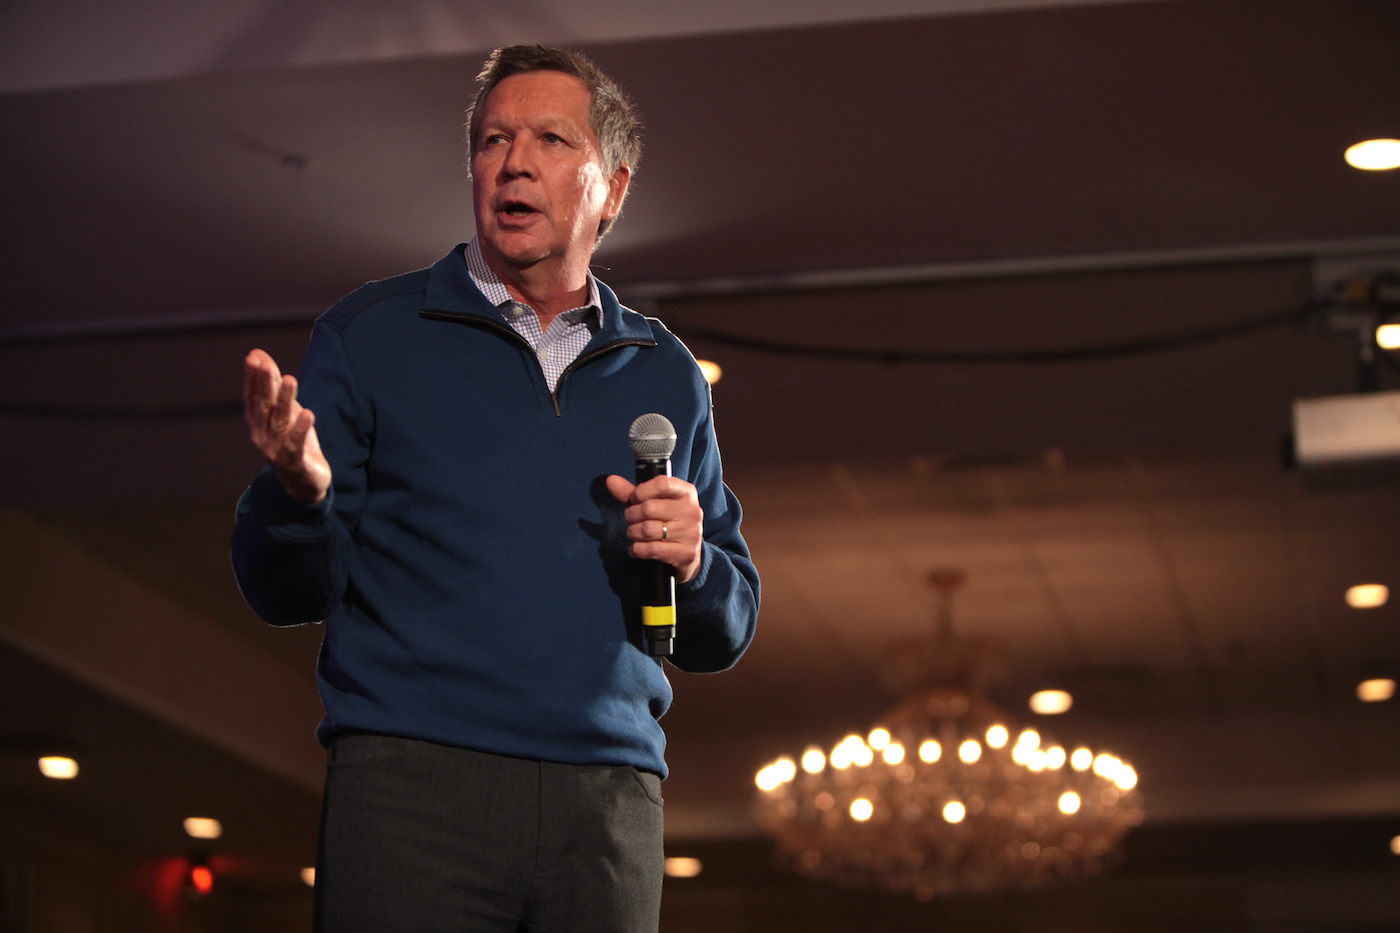 John Kasich speaking in Nashua, New Hampshire, on January 21, 2016 (photo by Gage Skidmore/Flickr)